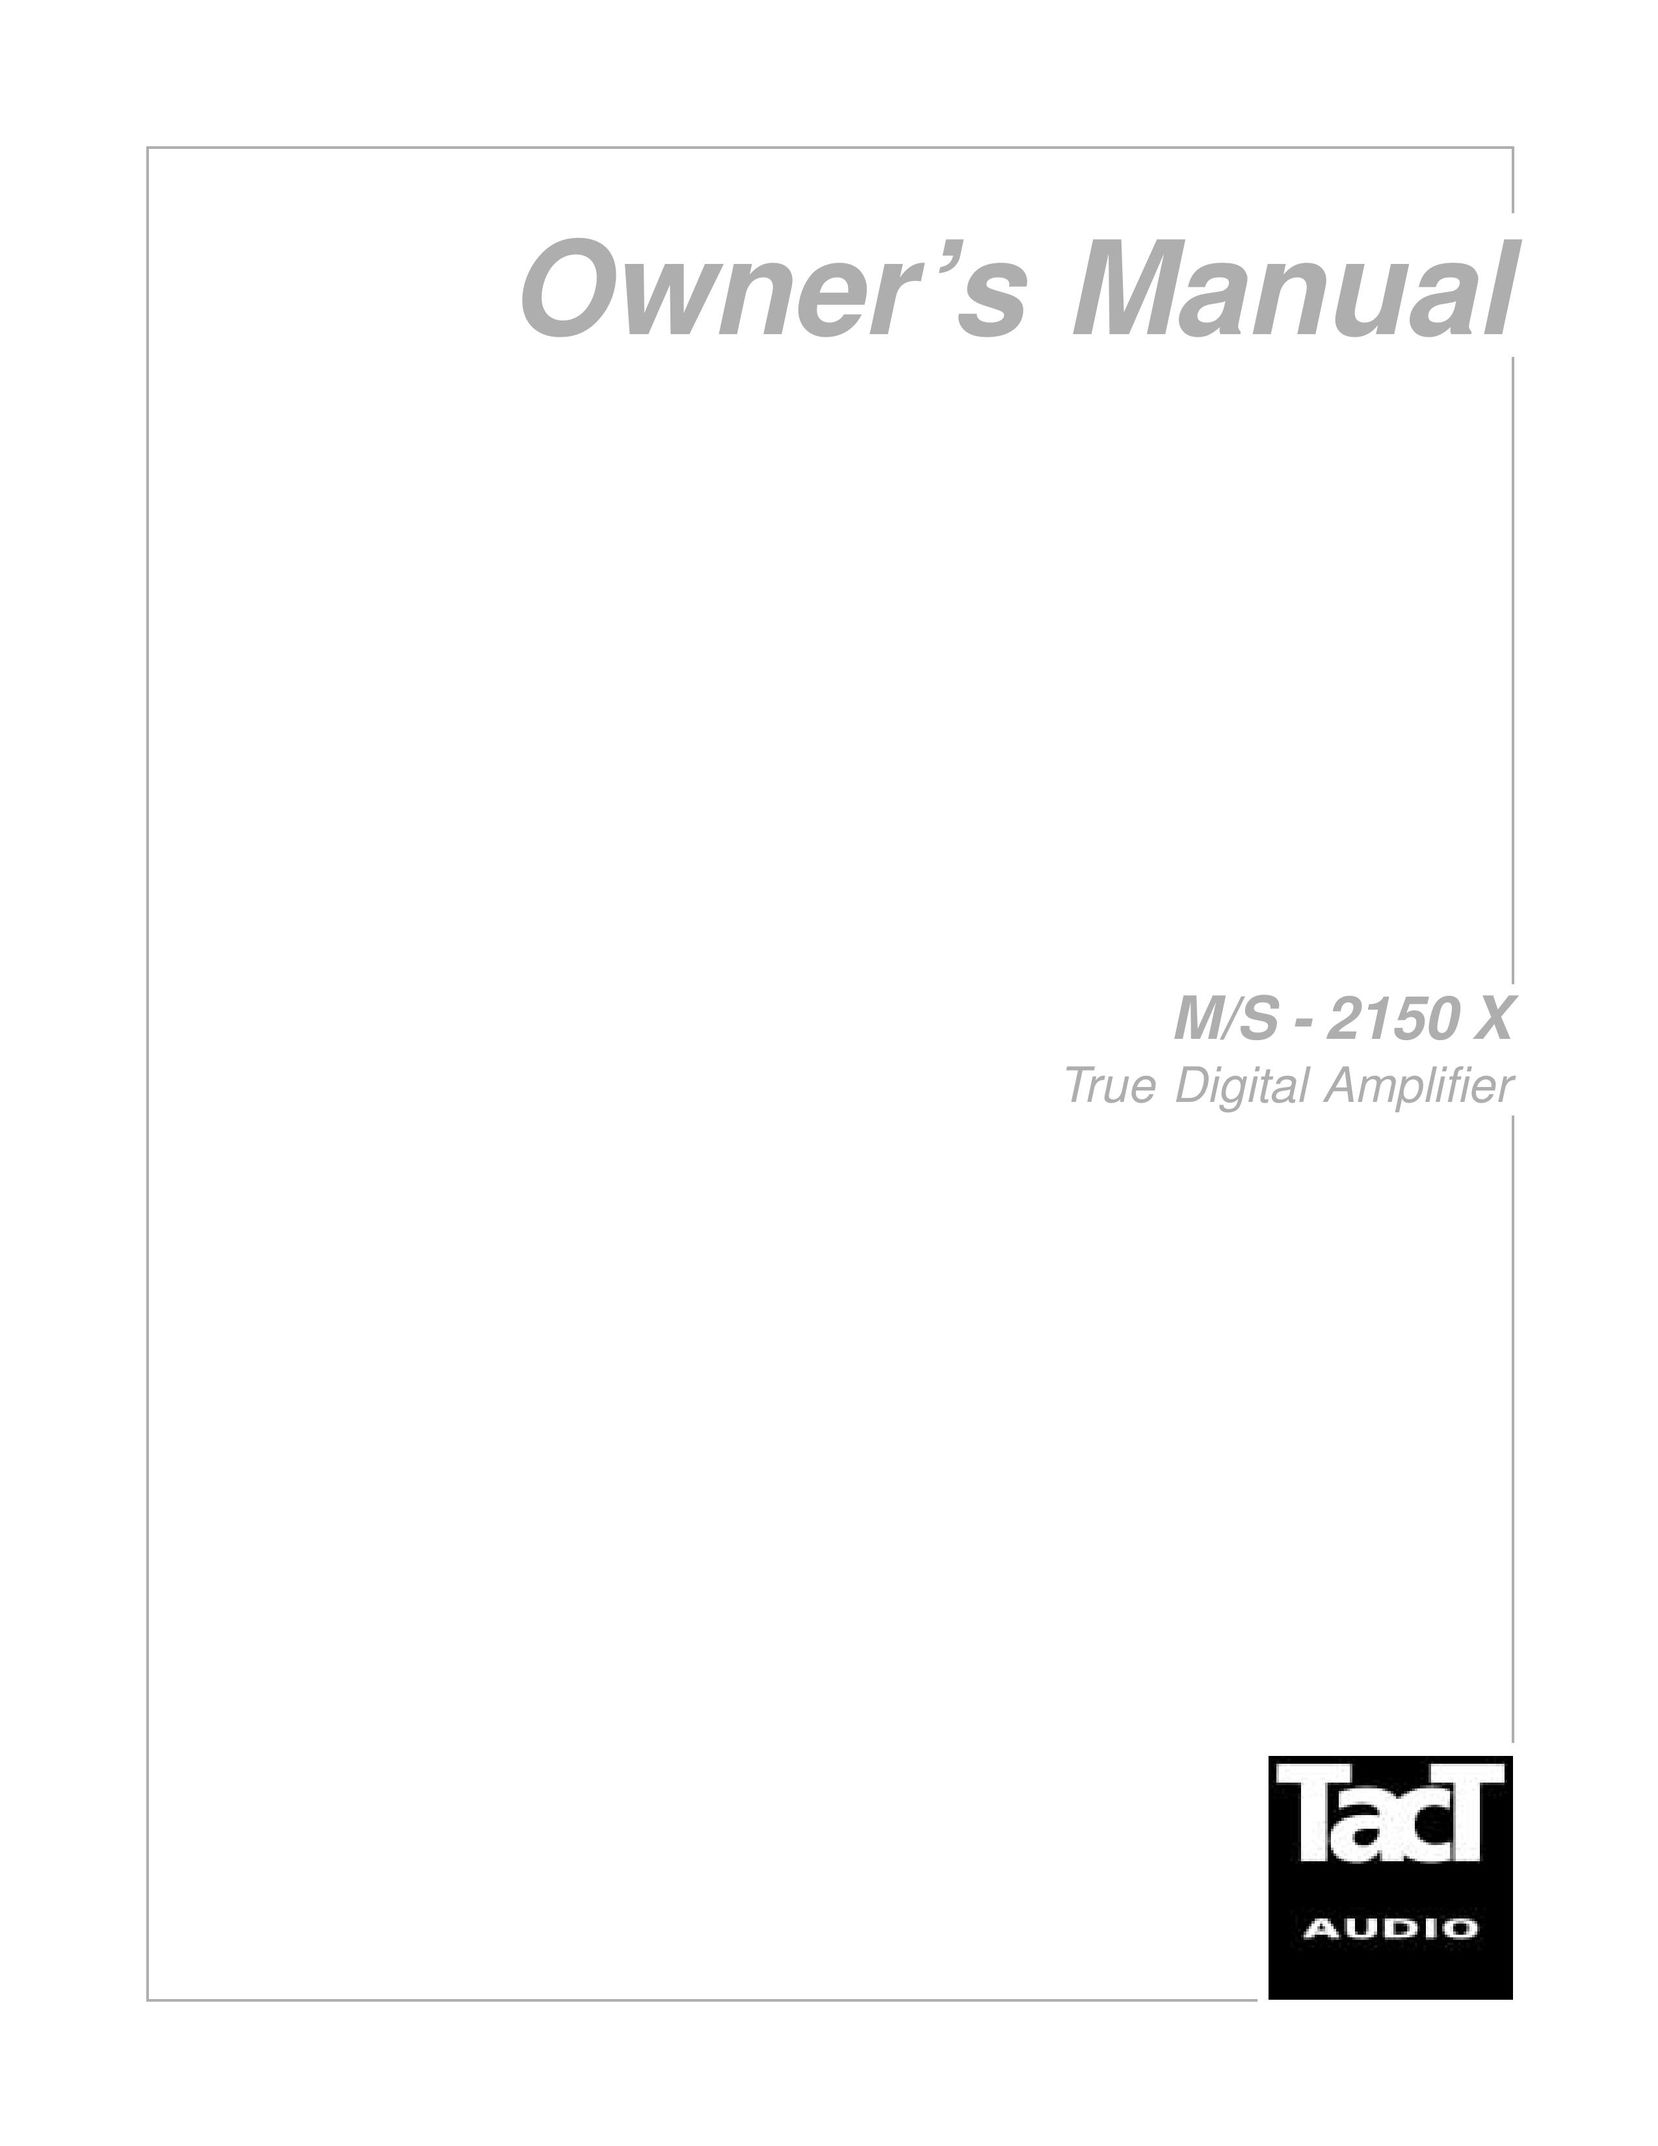 TacT Audio M/S - 2150 X Stereo Amplifier User Manual